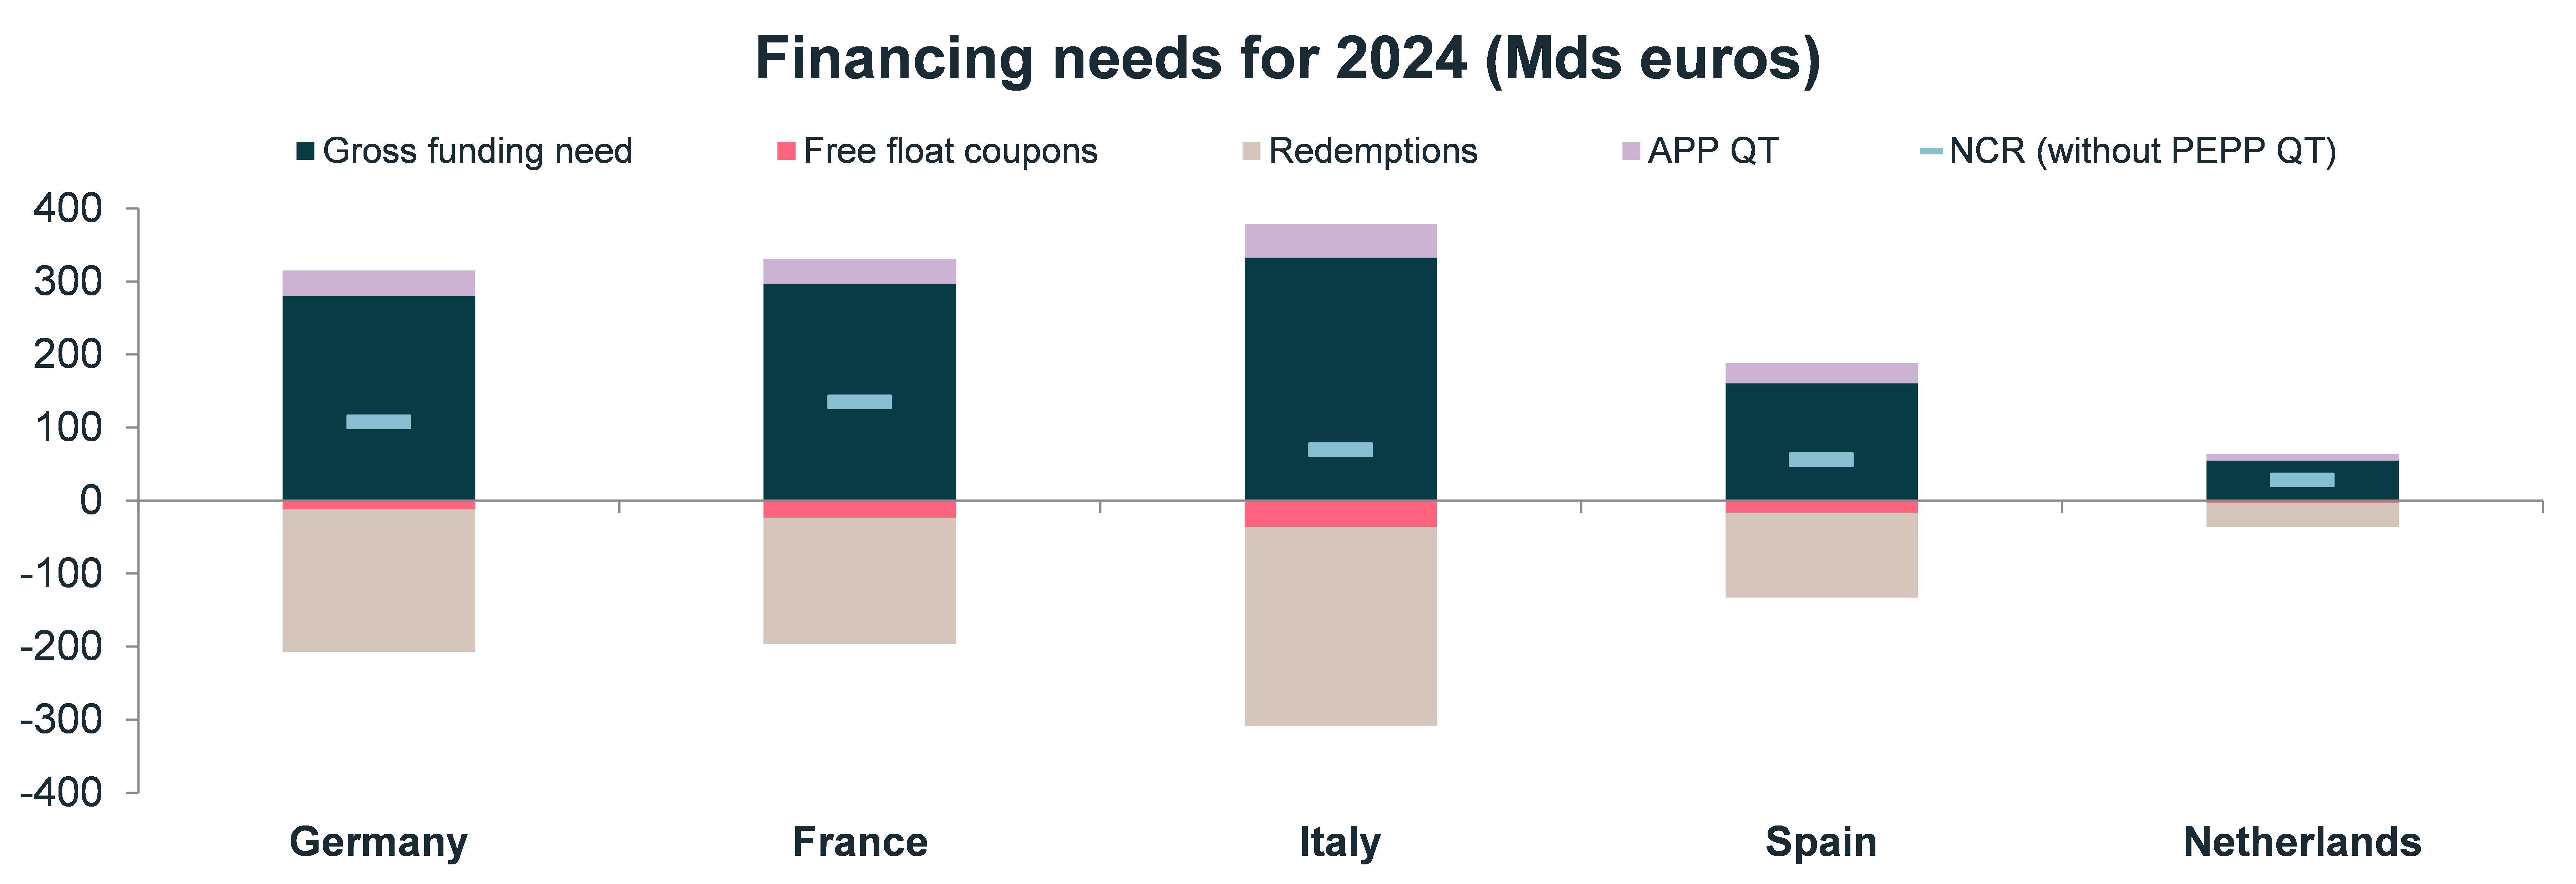 financing-needs-for-2024-mds-euros